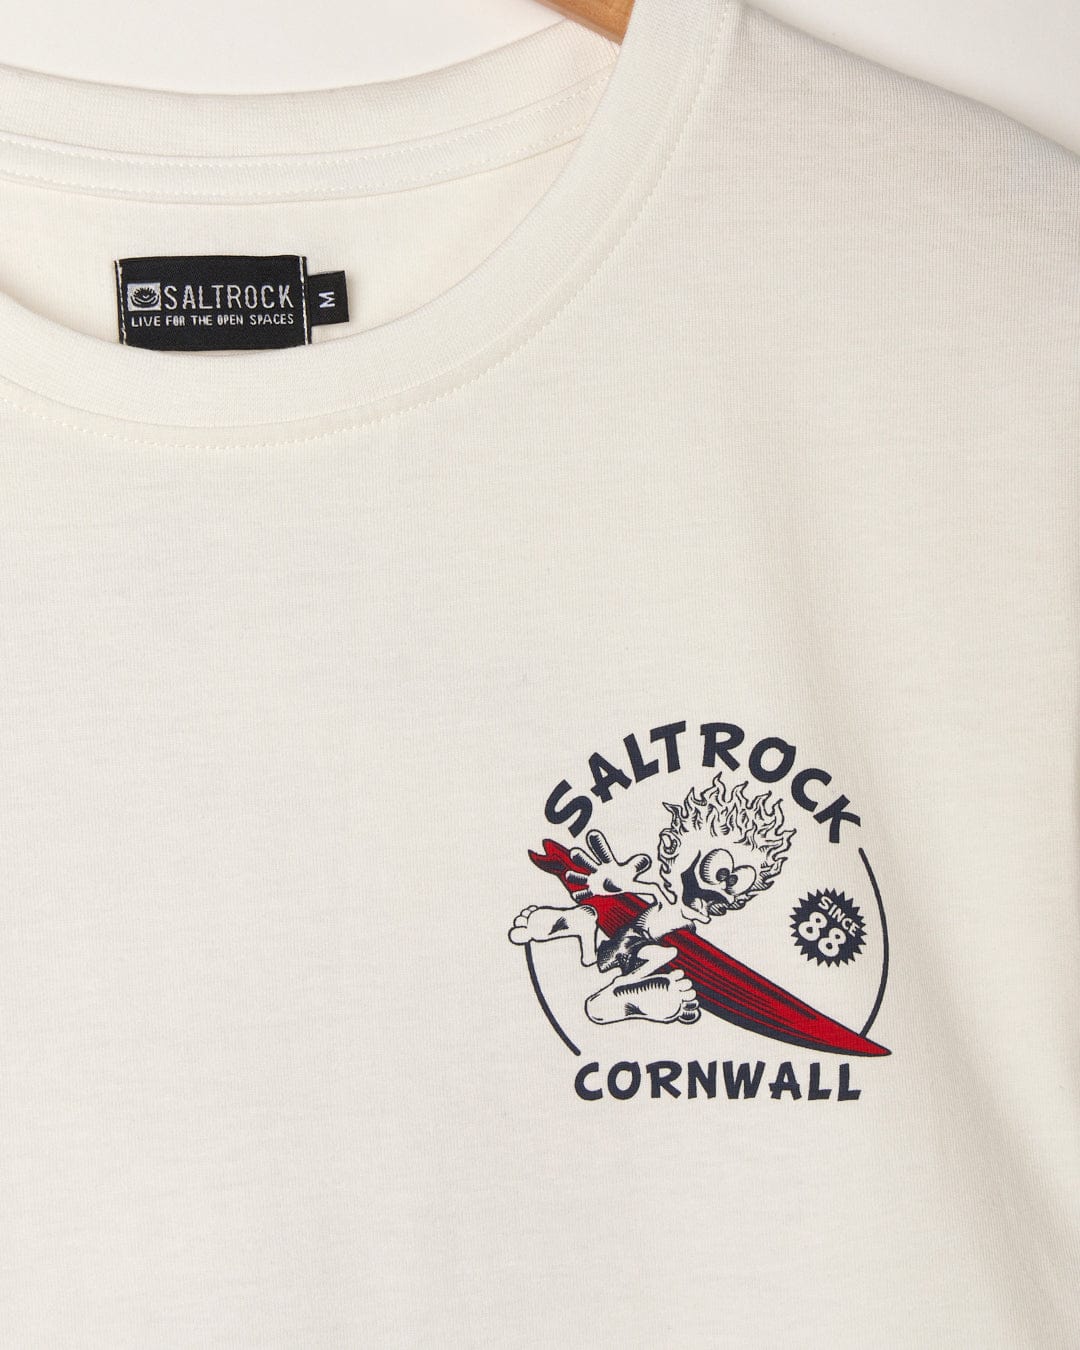 Close-up of a white Wave Rider Cornwall t-shirt made from peached soft material, showcasing the Saltrock logo with a graphic of a surfer and waves.